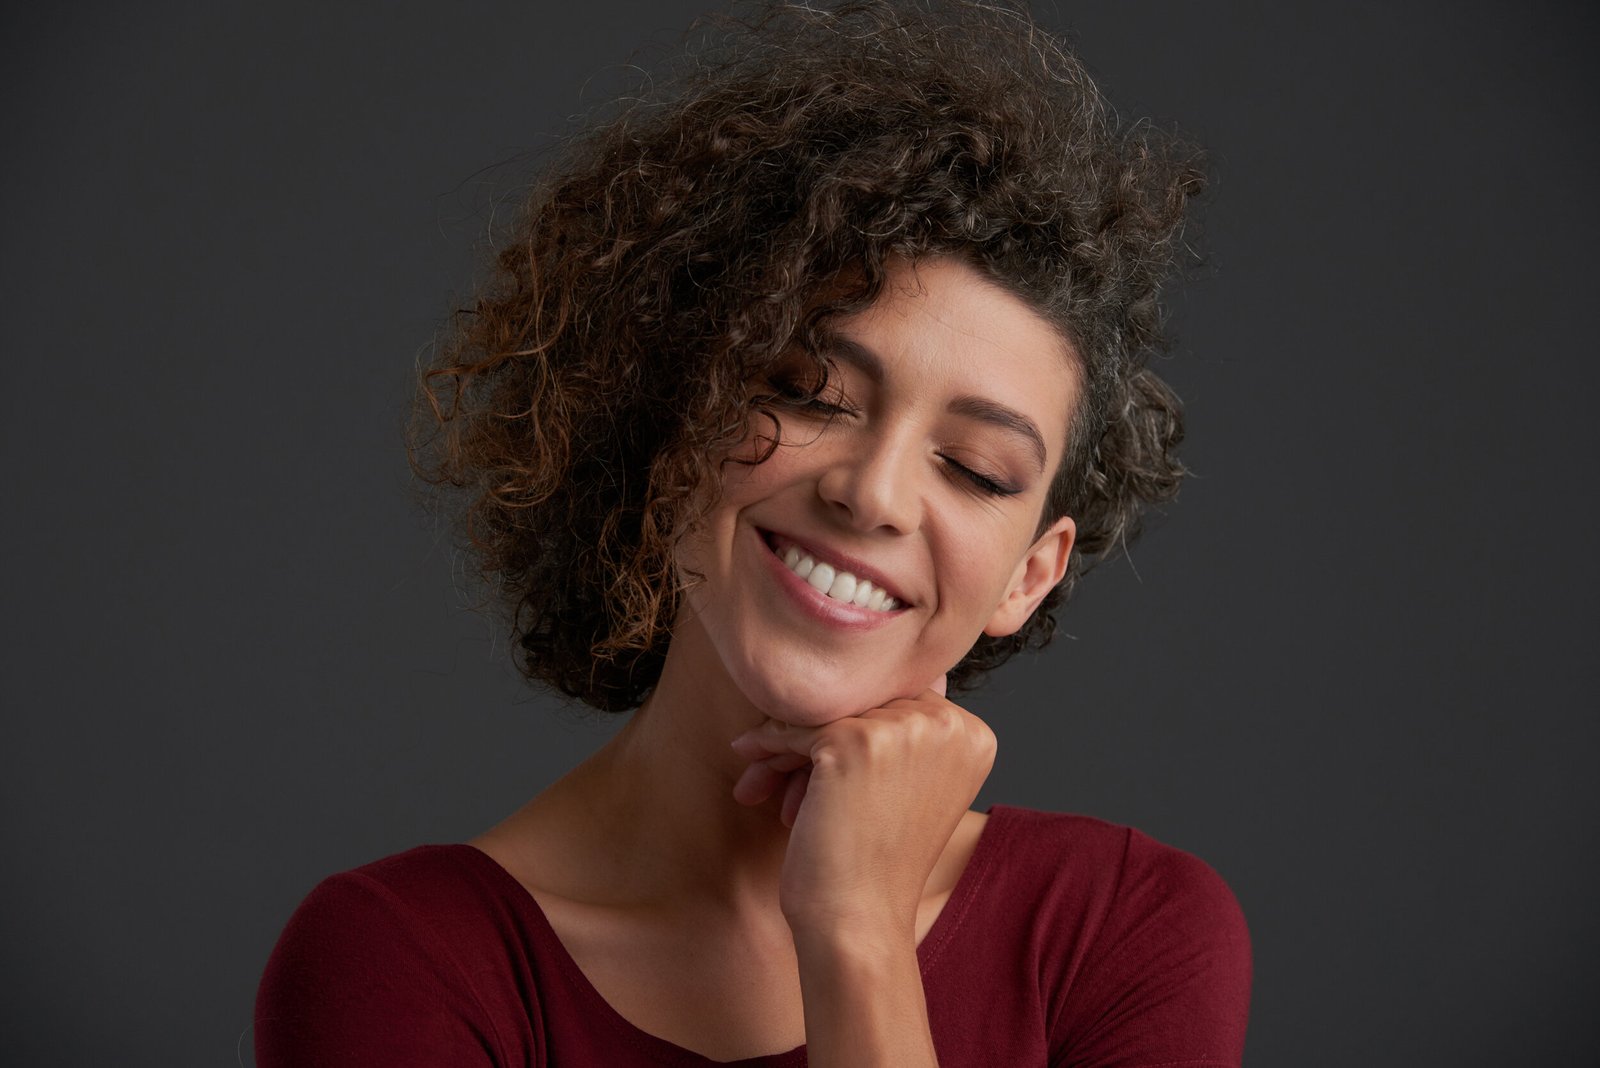 Smiling happy woman with her eyes closed, isolated on grey